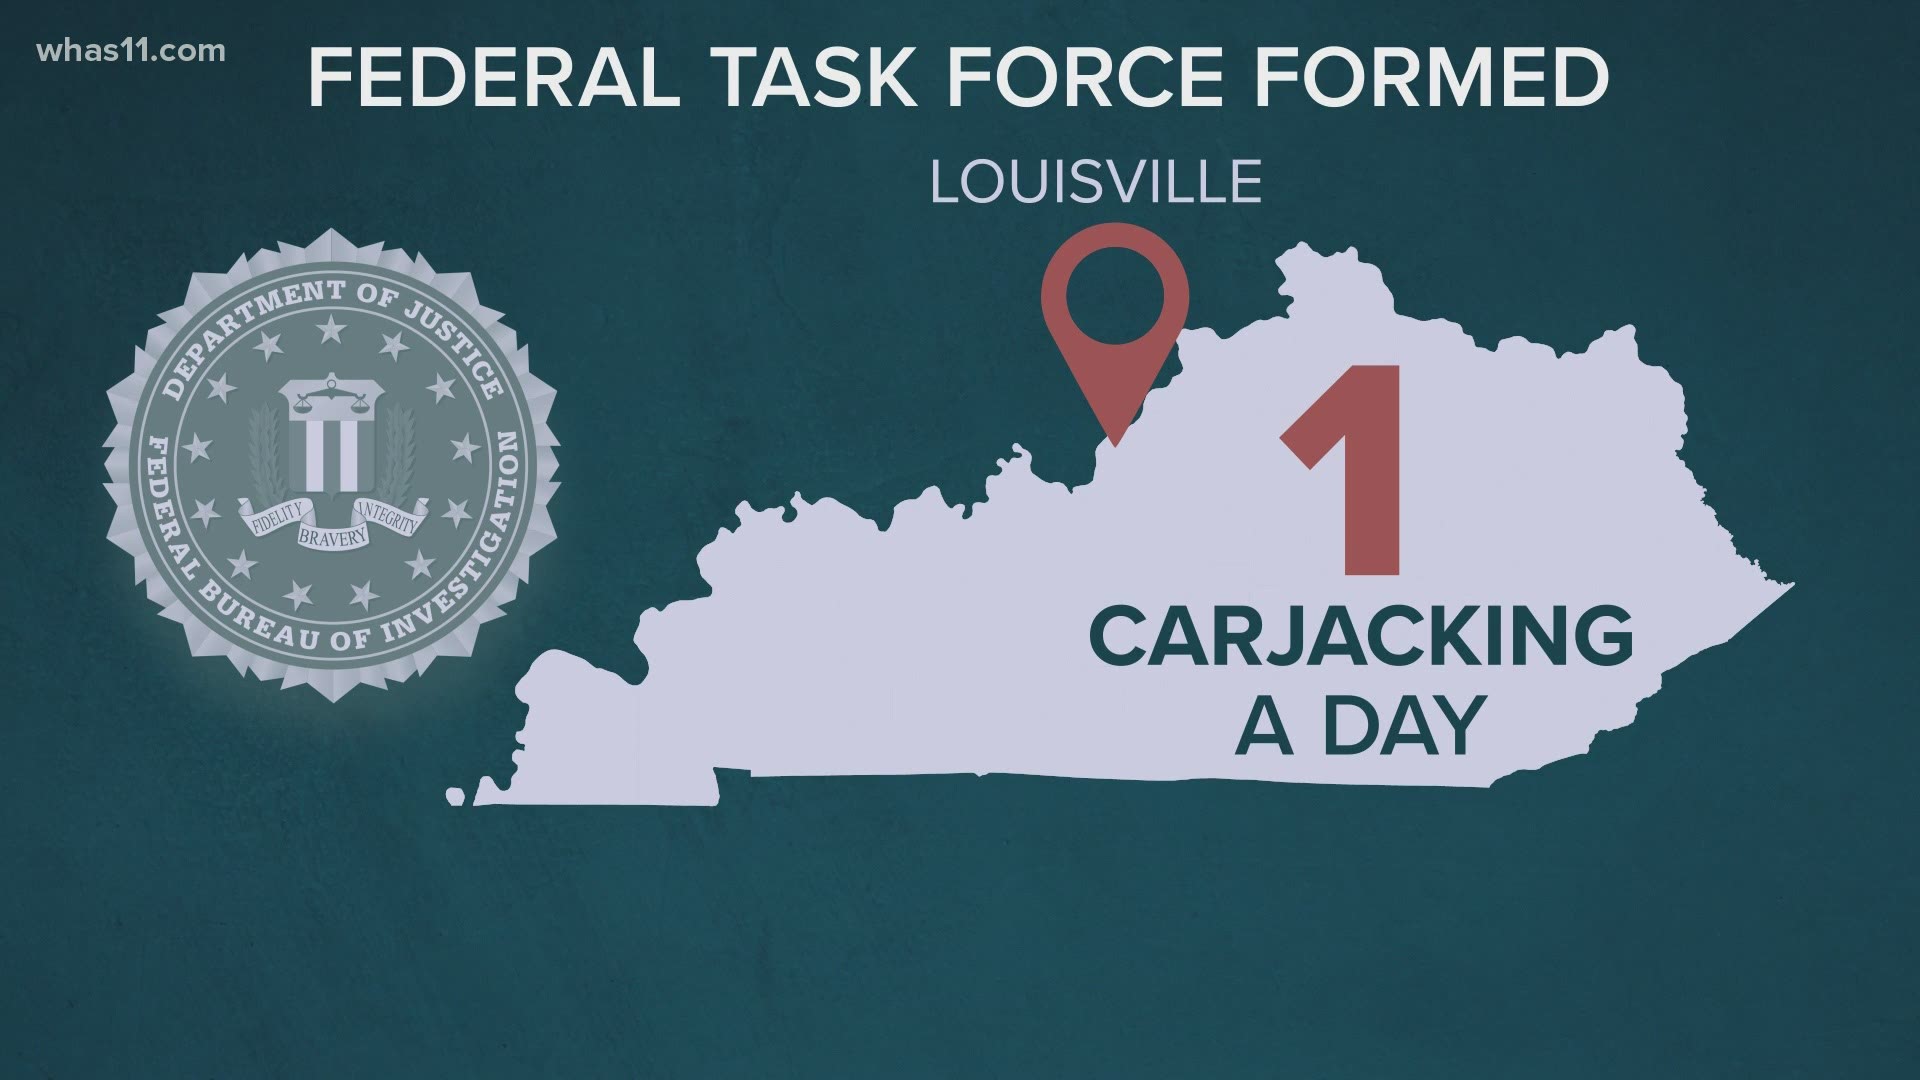 Carjackings are a problem nationwide, the FBI said. However, Louisville is seeing the biggest increase of the crime against cities of a population similar size.